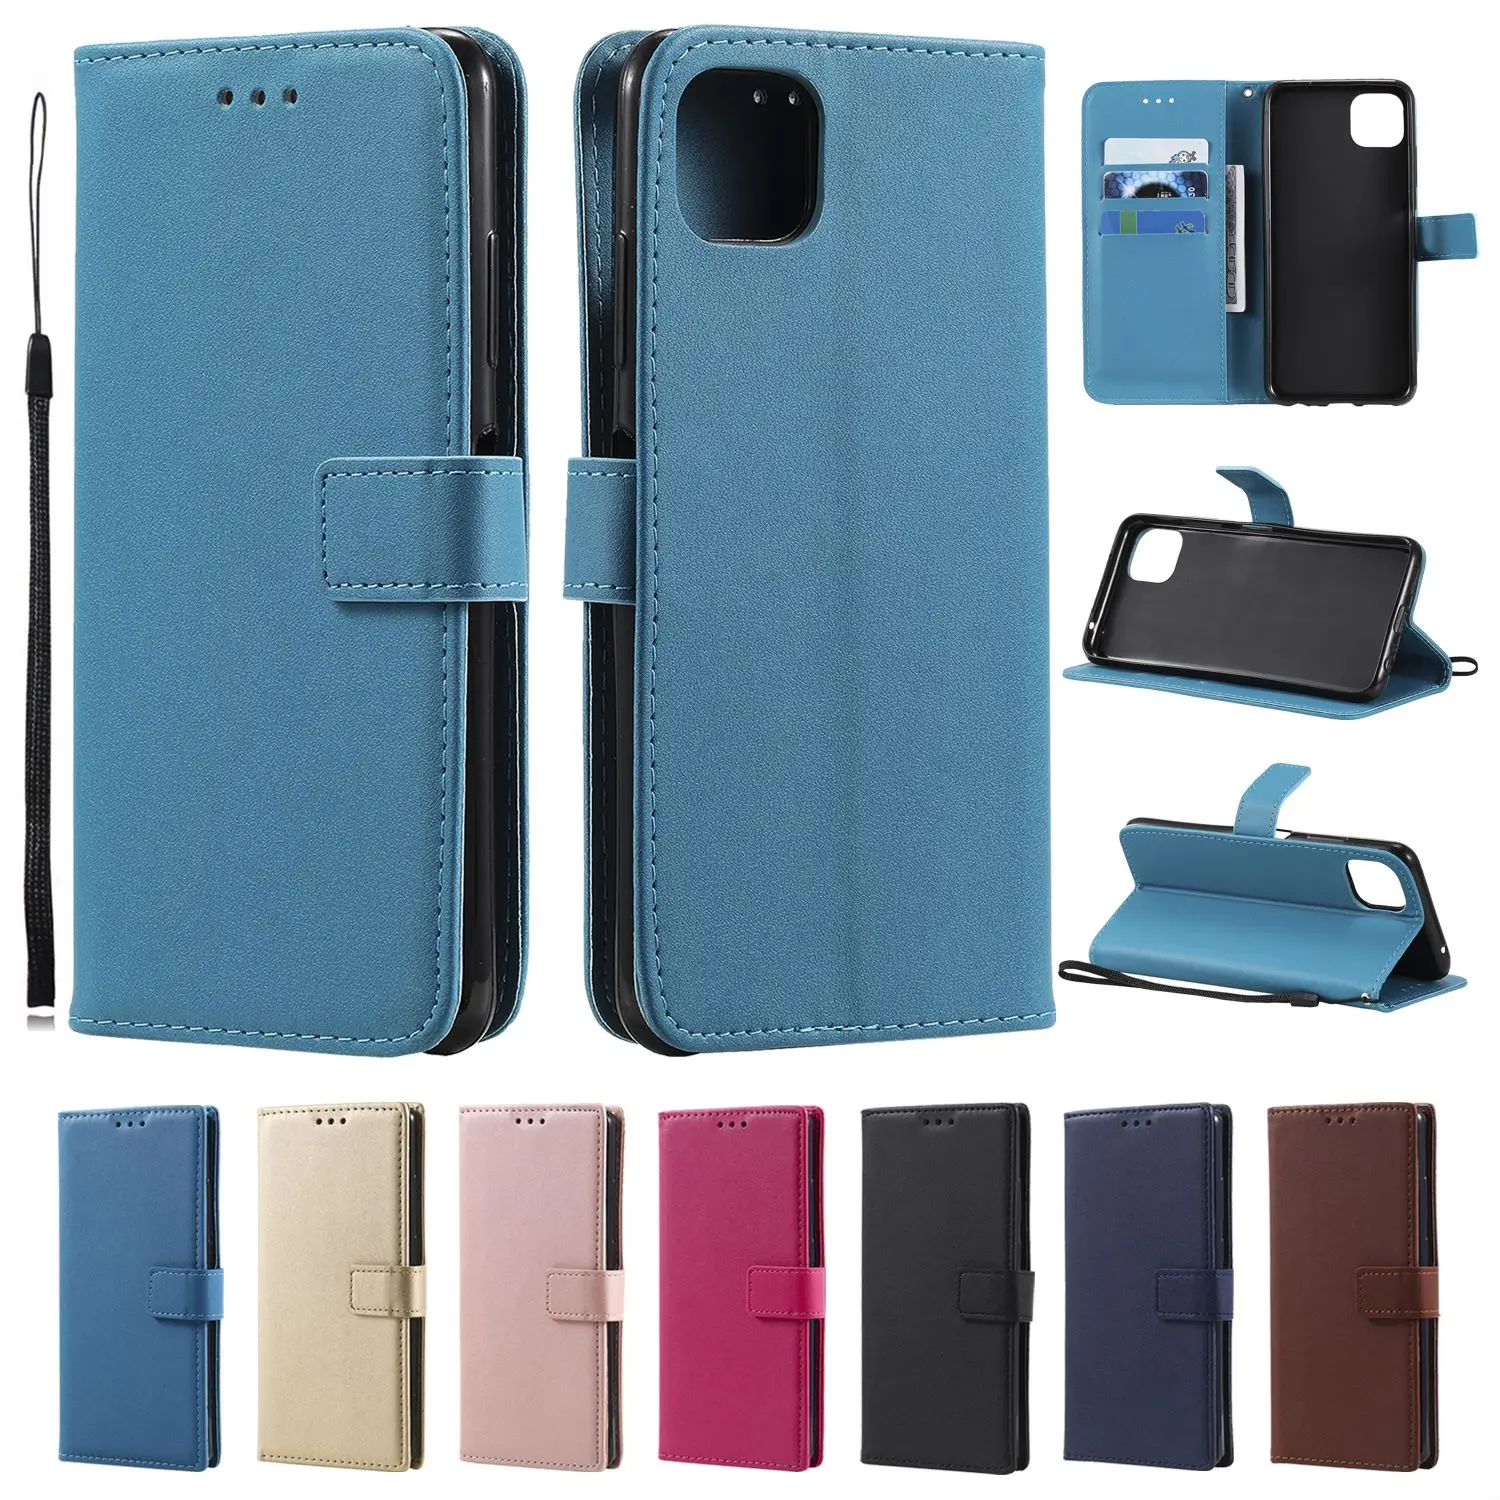 

Phone Case For Huawei Y3 Y5 II Y6 Pro Y5P Y6P Mate 7 8 9 10 20 30 Pro 20 30 Lite Leather For Honor 5X 6C 6X 8 10 9A Phone Cases